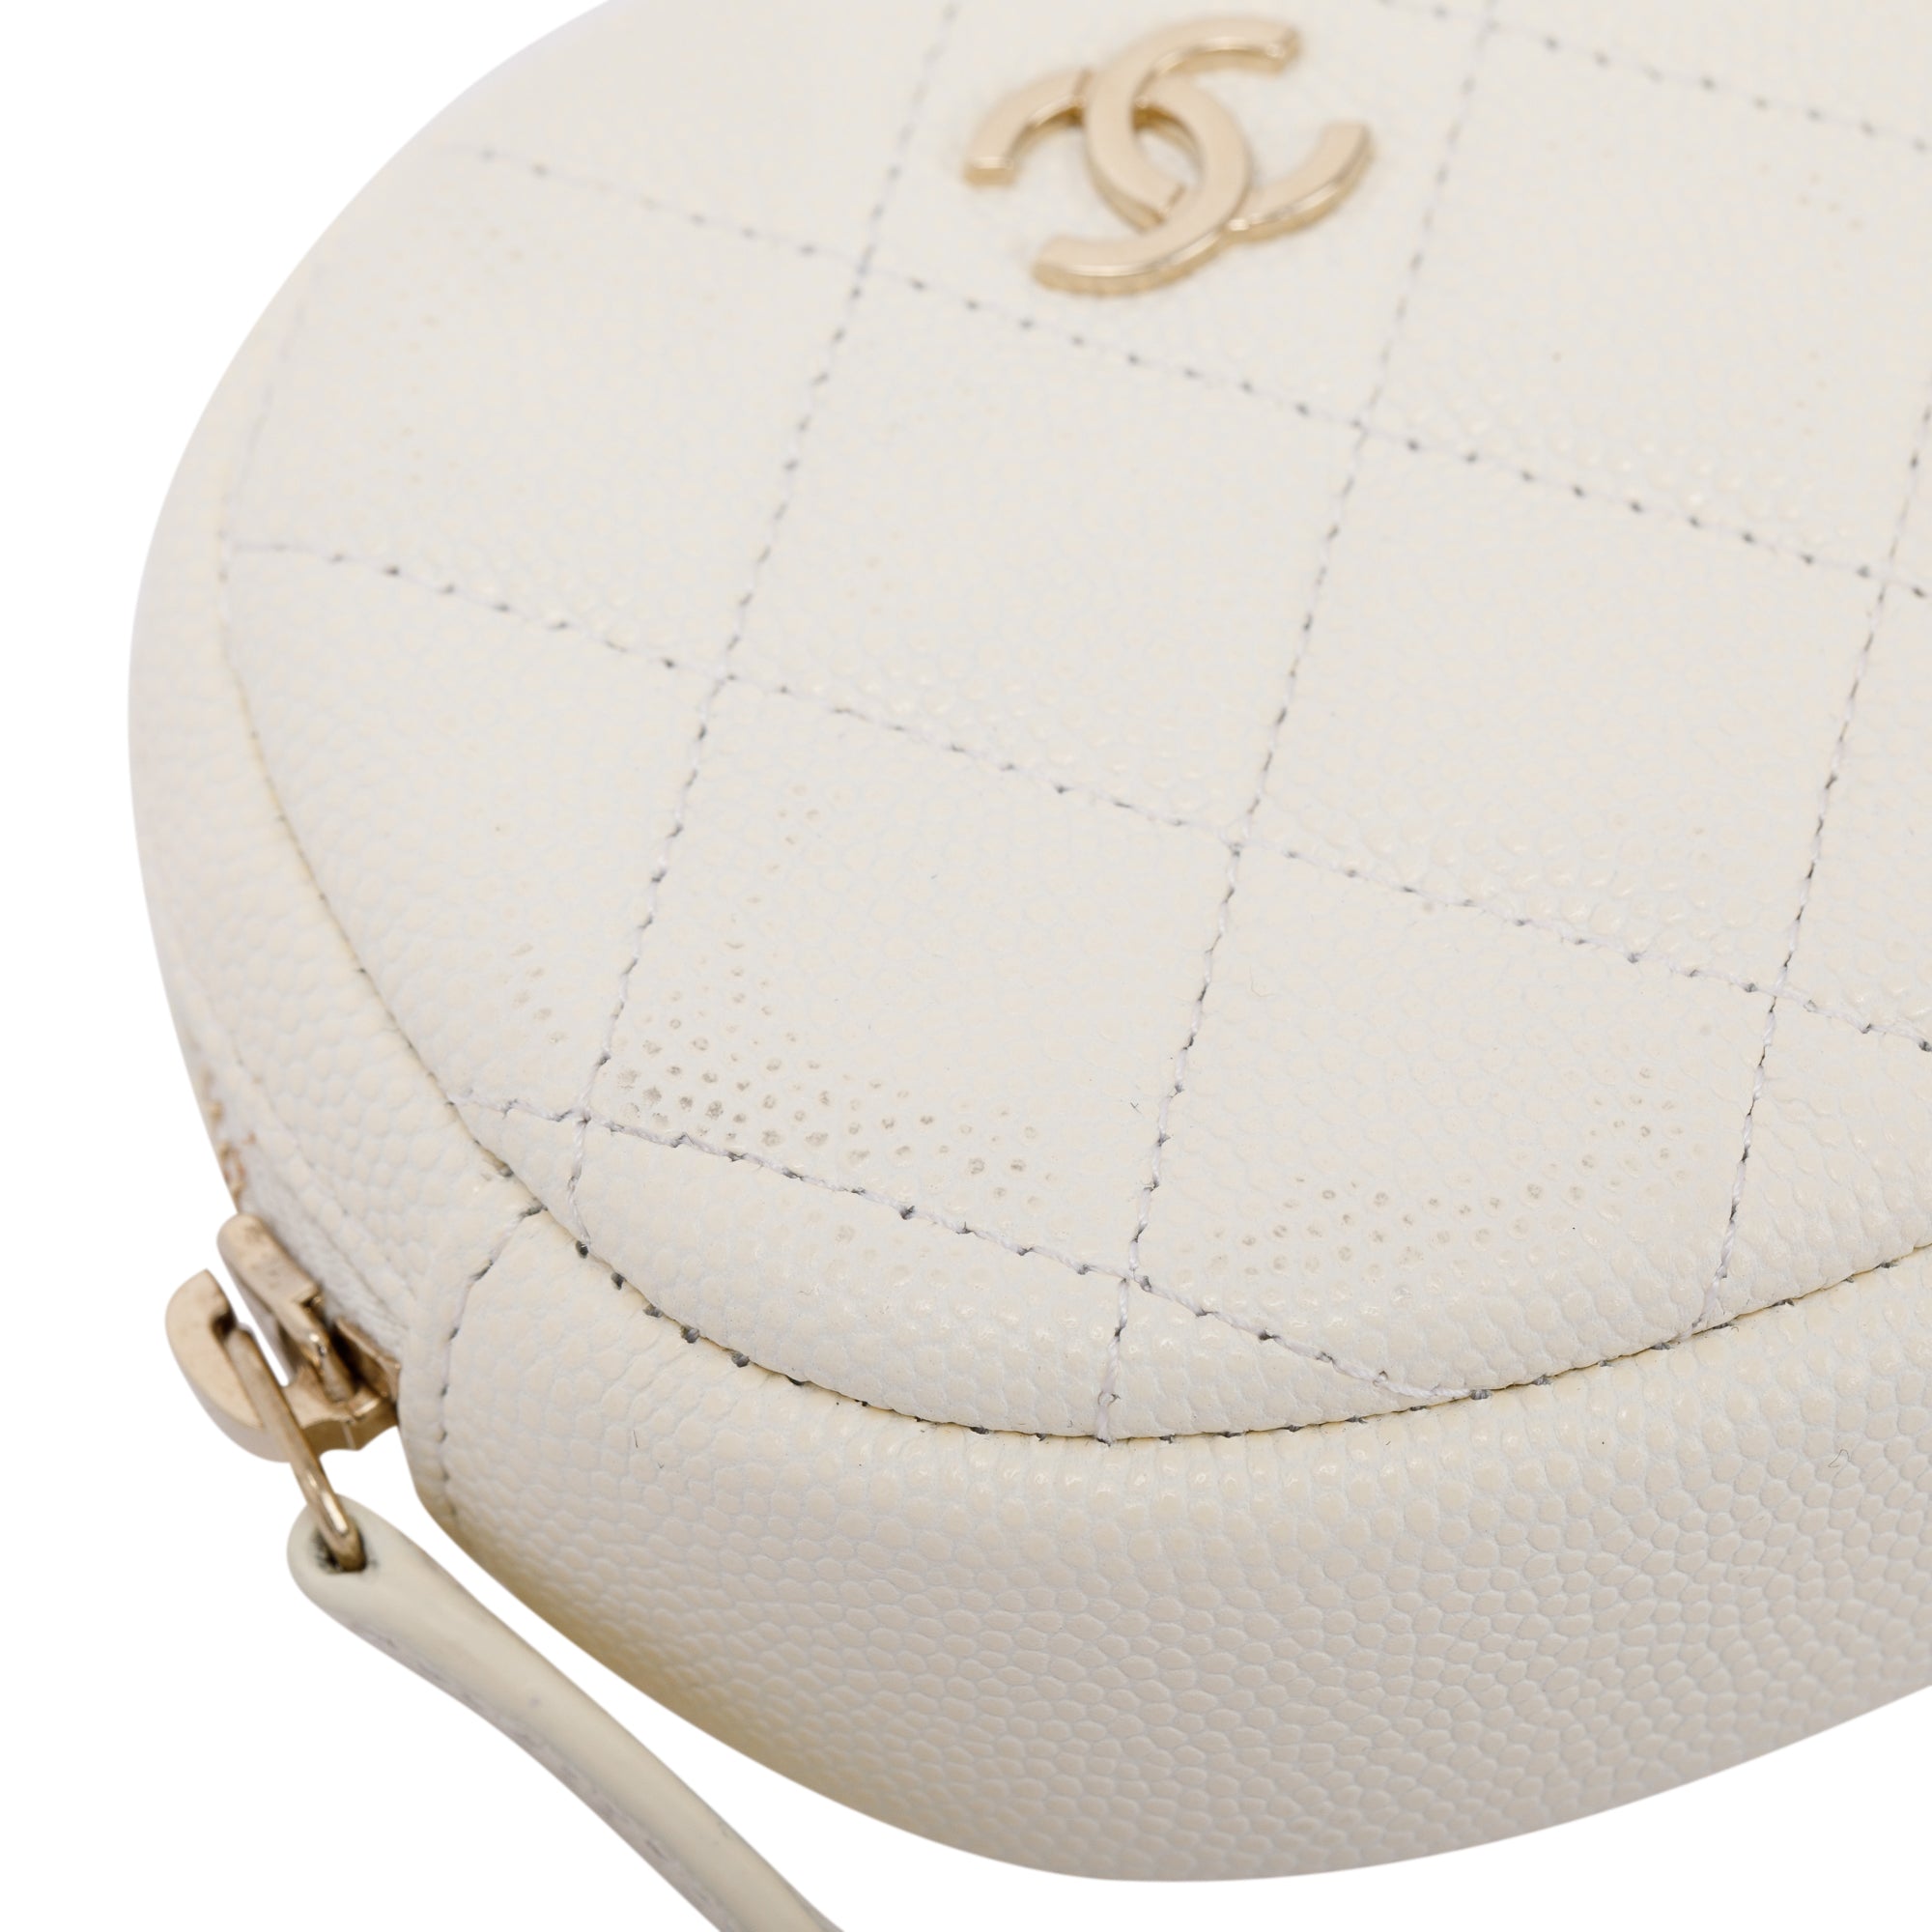 At Auction: A Chanel Zippered Card/Coin Purse w/ Authenticity